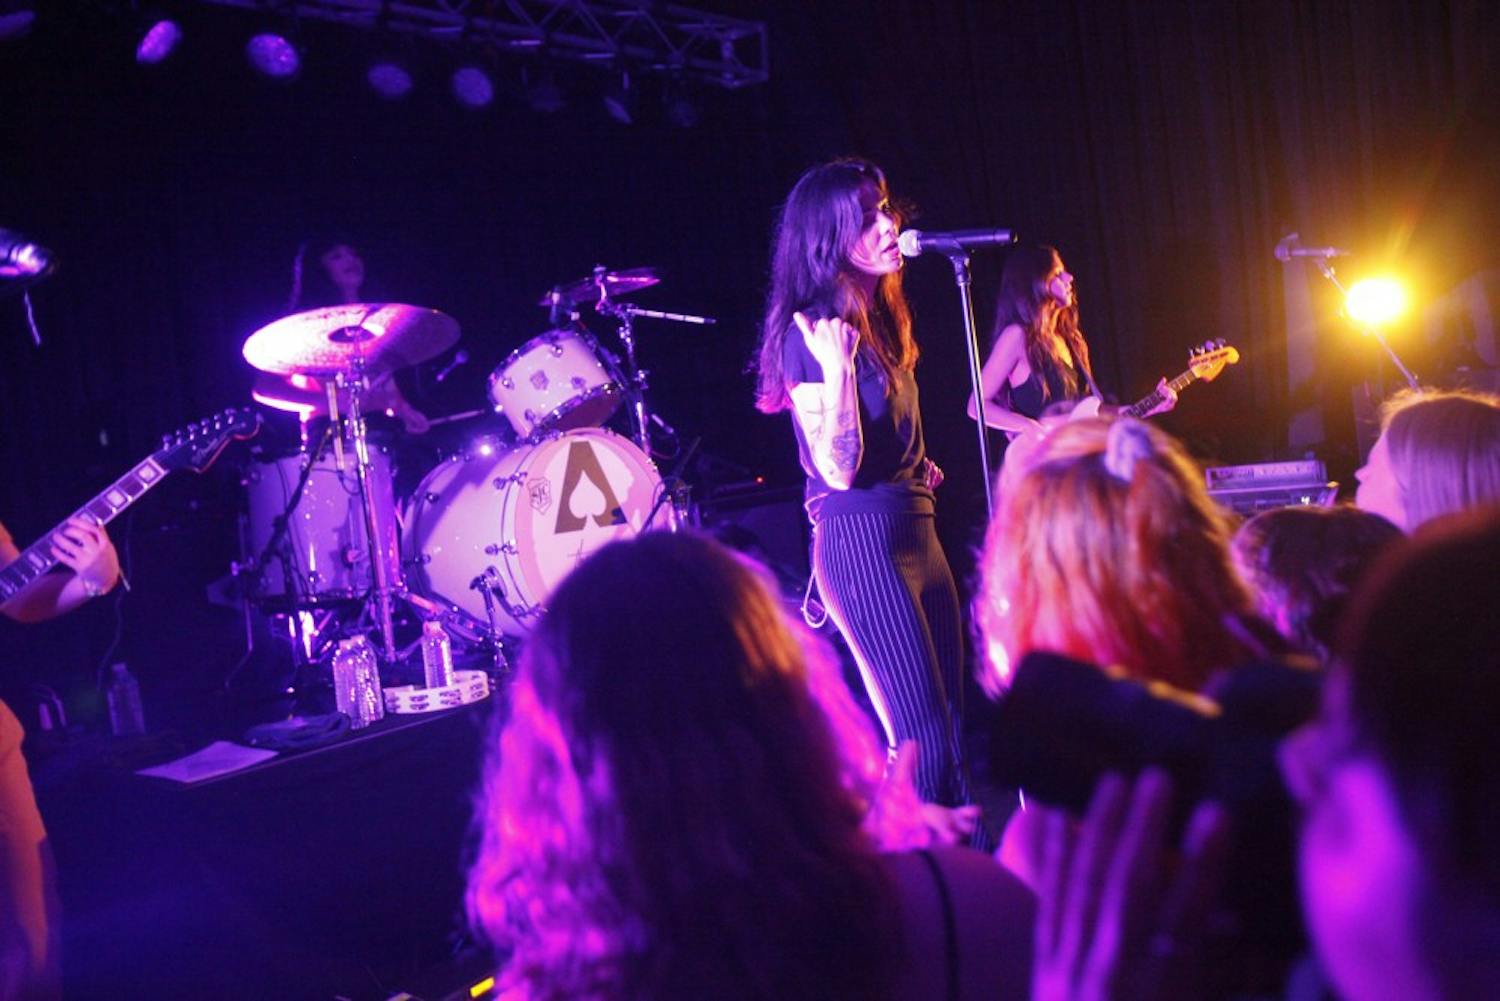 The Aces, a four-part girlband, play sold out show at the Cat's Cradle